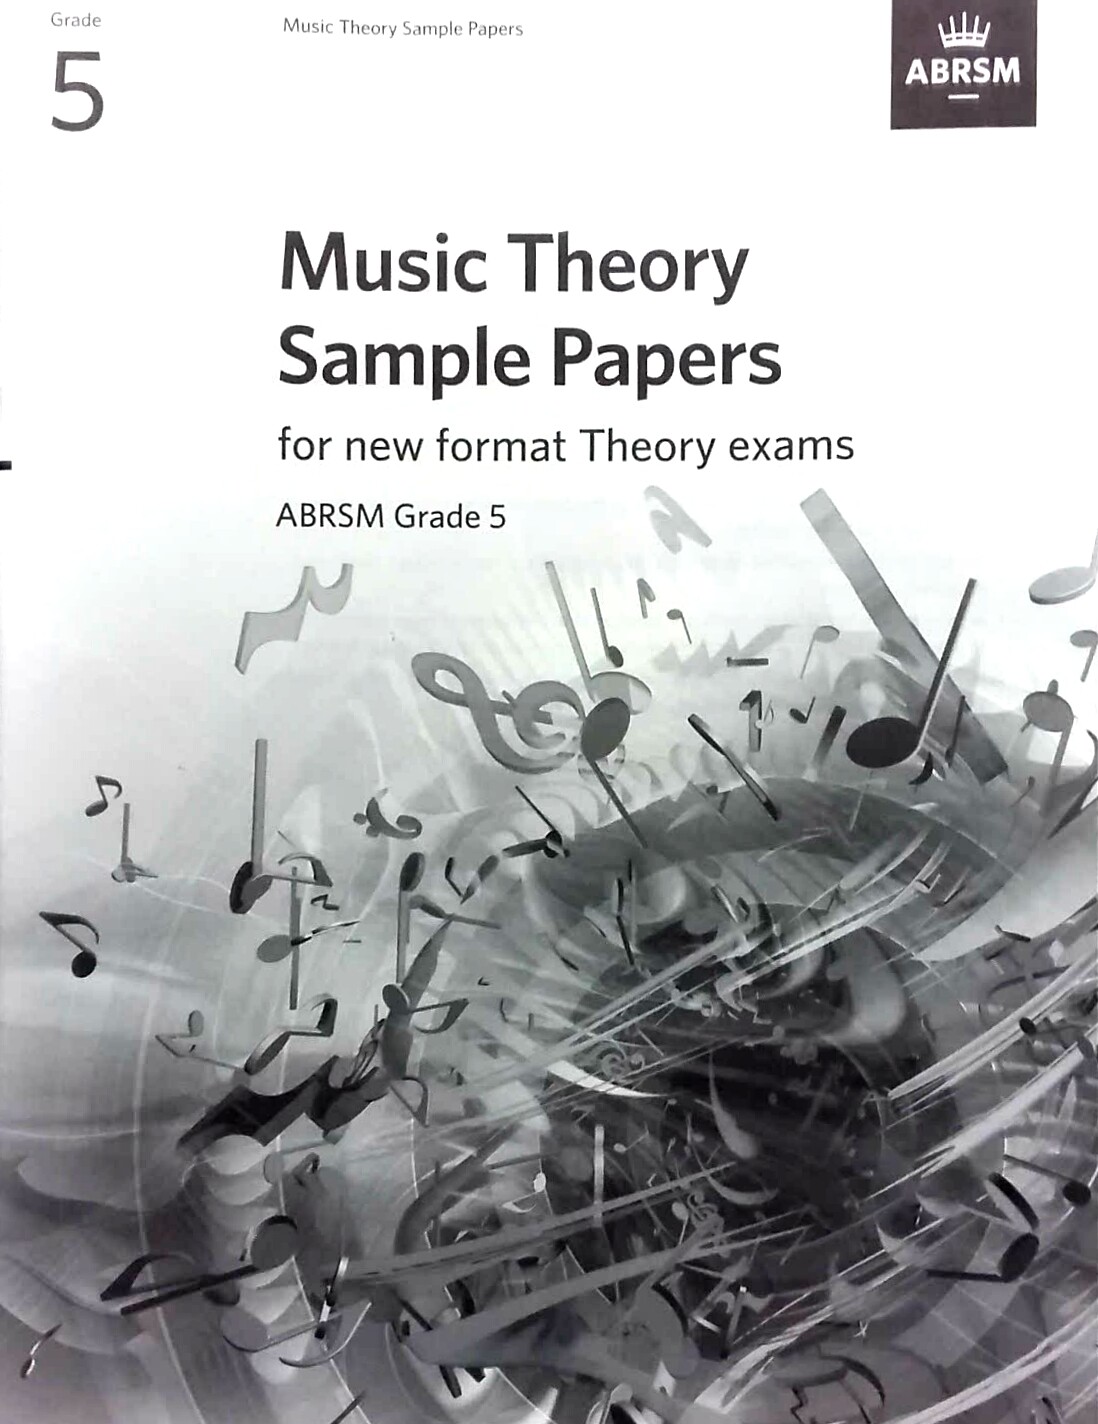 ABRSM Music Theory Sample Papers 225 Grade 25